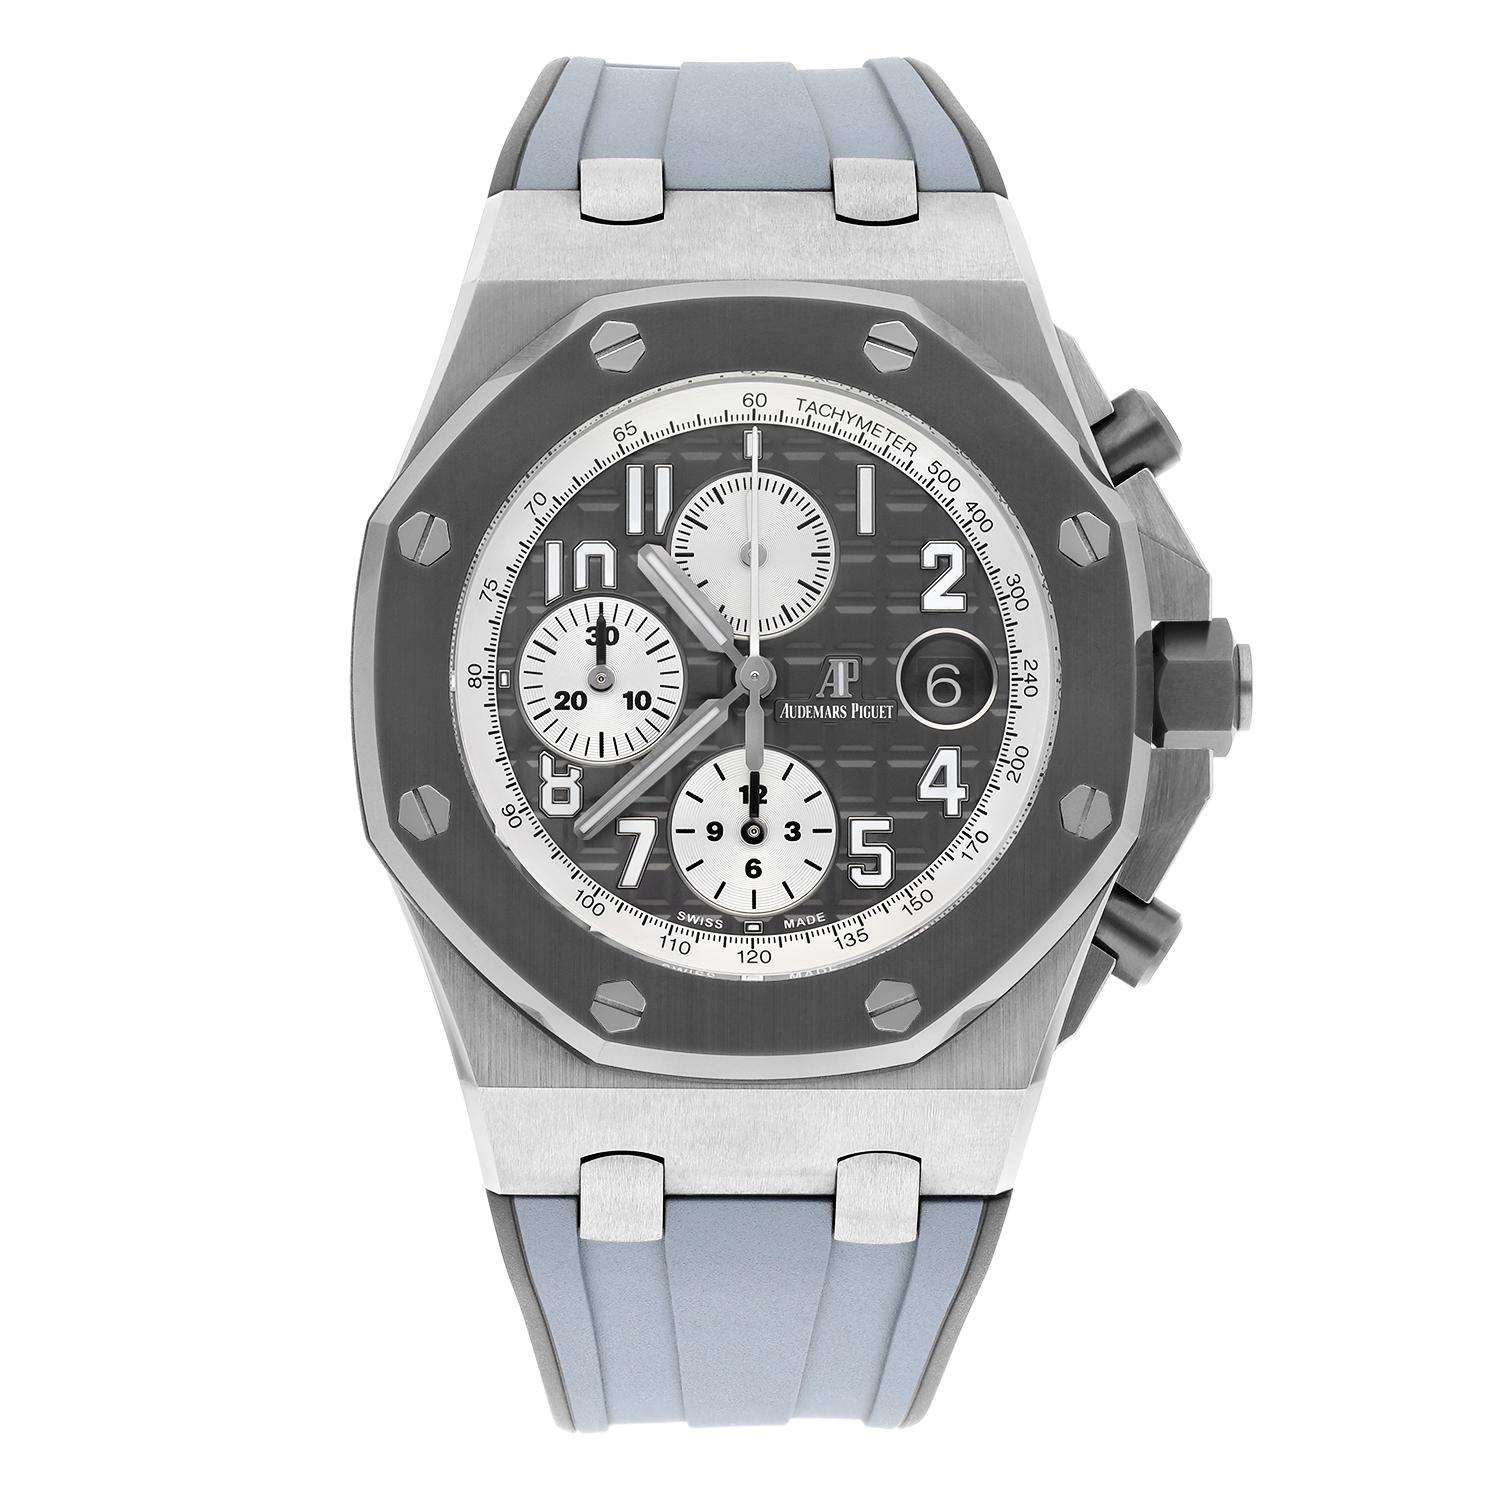 The Audemars Piguet Royal Oak Offshore Chronograph 26470IO.OO.A006CA.01 is a watch that demands attention. Its bold design and titanium construction make it a true standout piece. The watch features a 42mm titanium case with an octagonal bezel and a